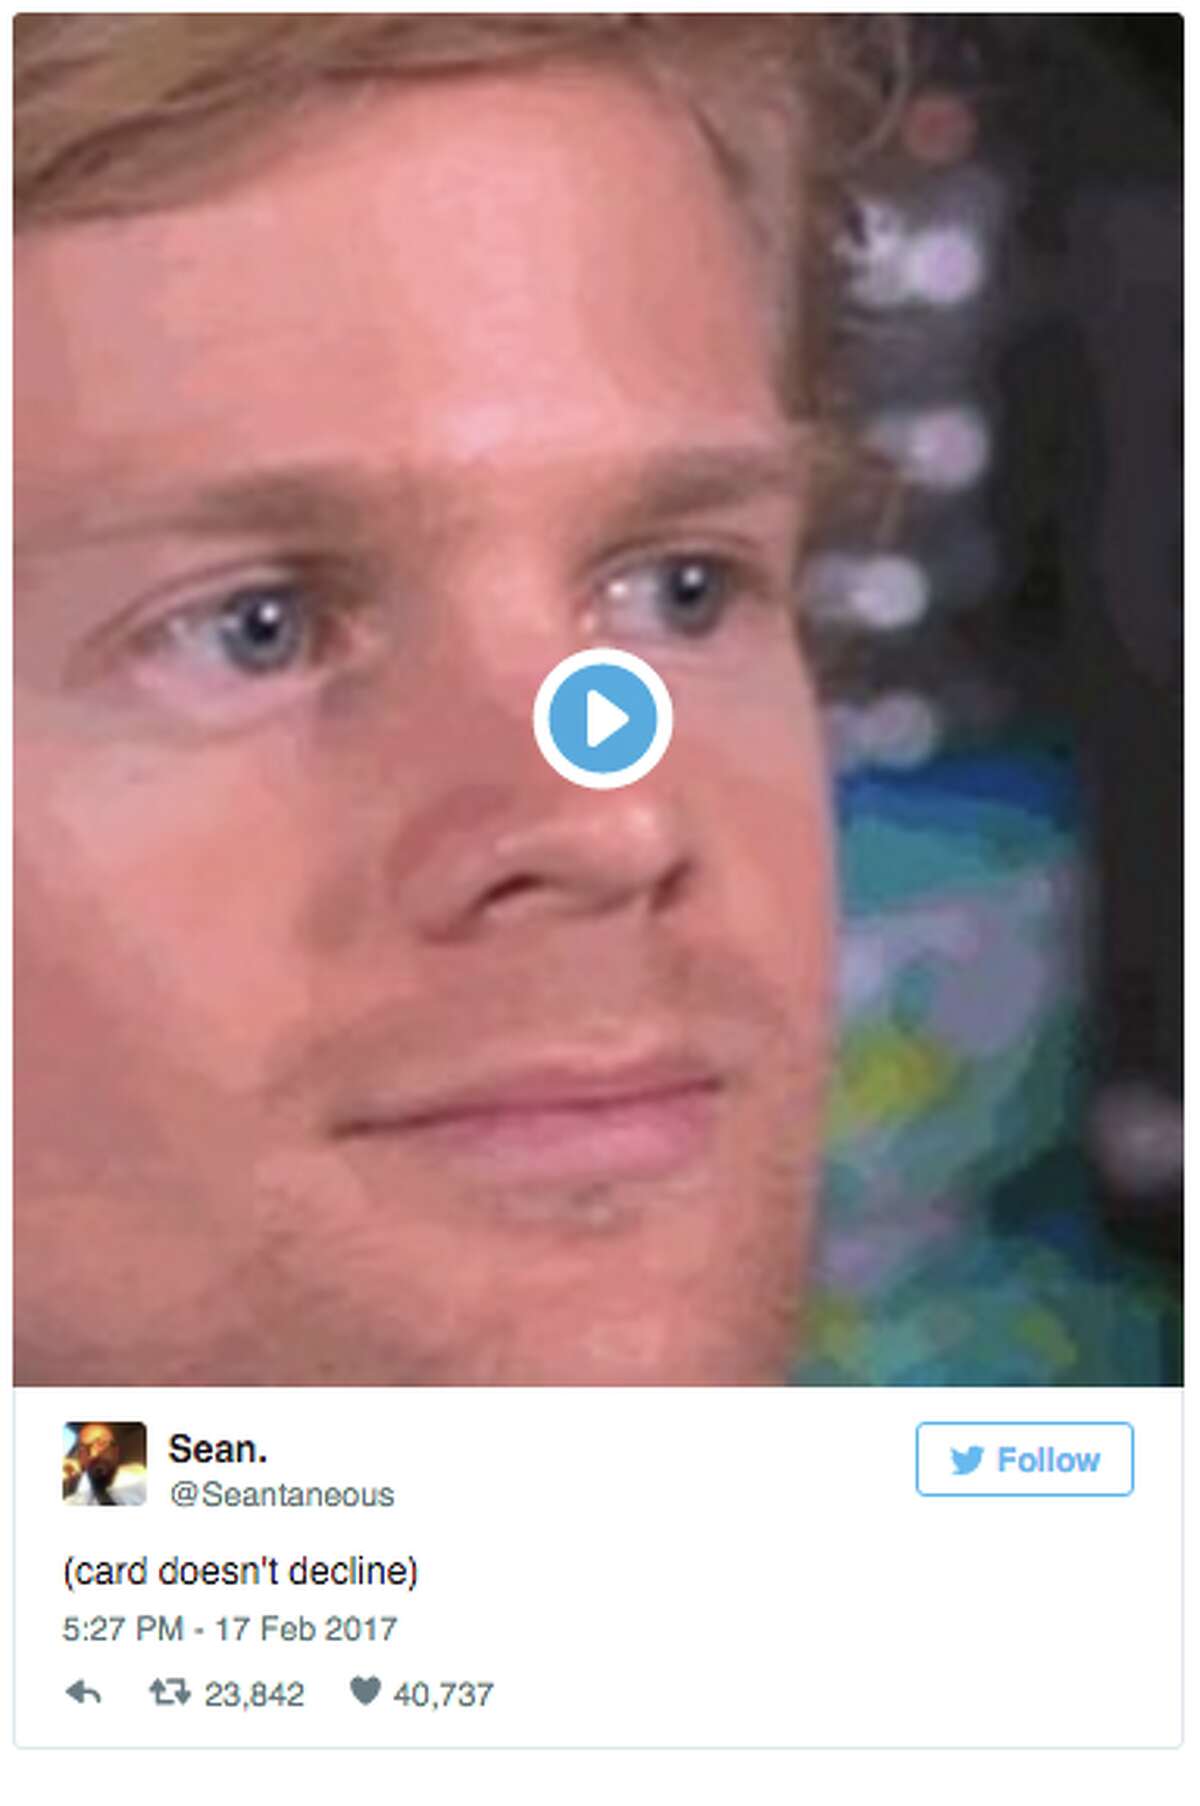 Drew Scanlon, of "white guy blinking" meme fame, is a San Francisco native and just as surprised about his newfound stardom as the rest of us.